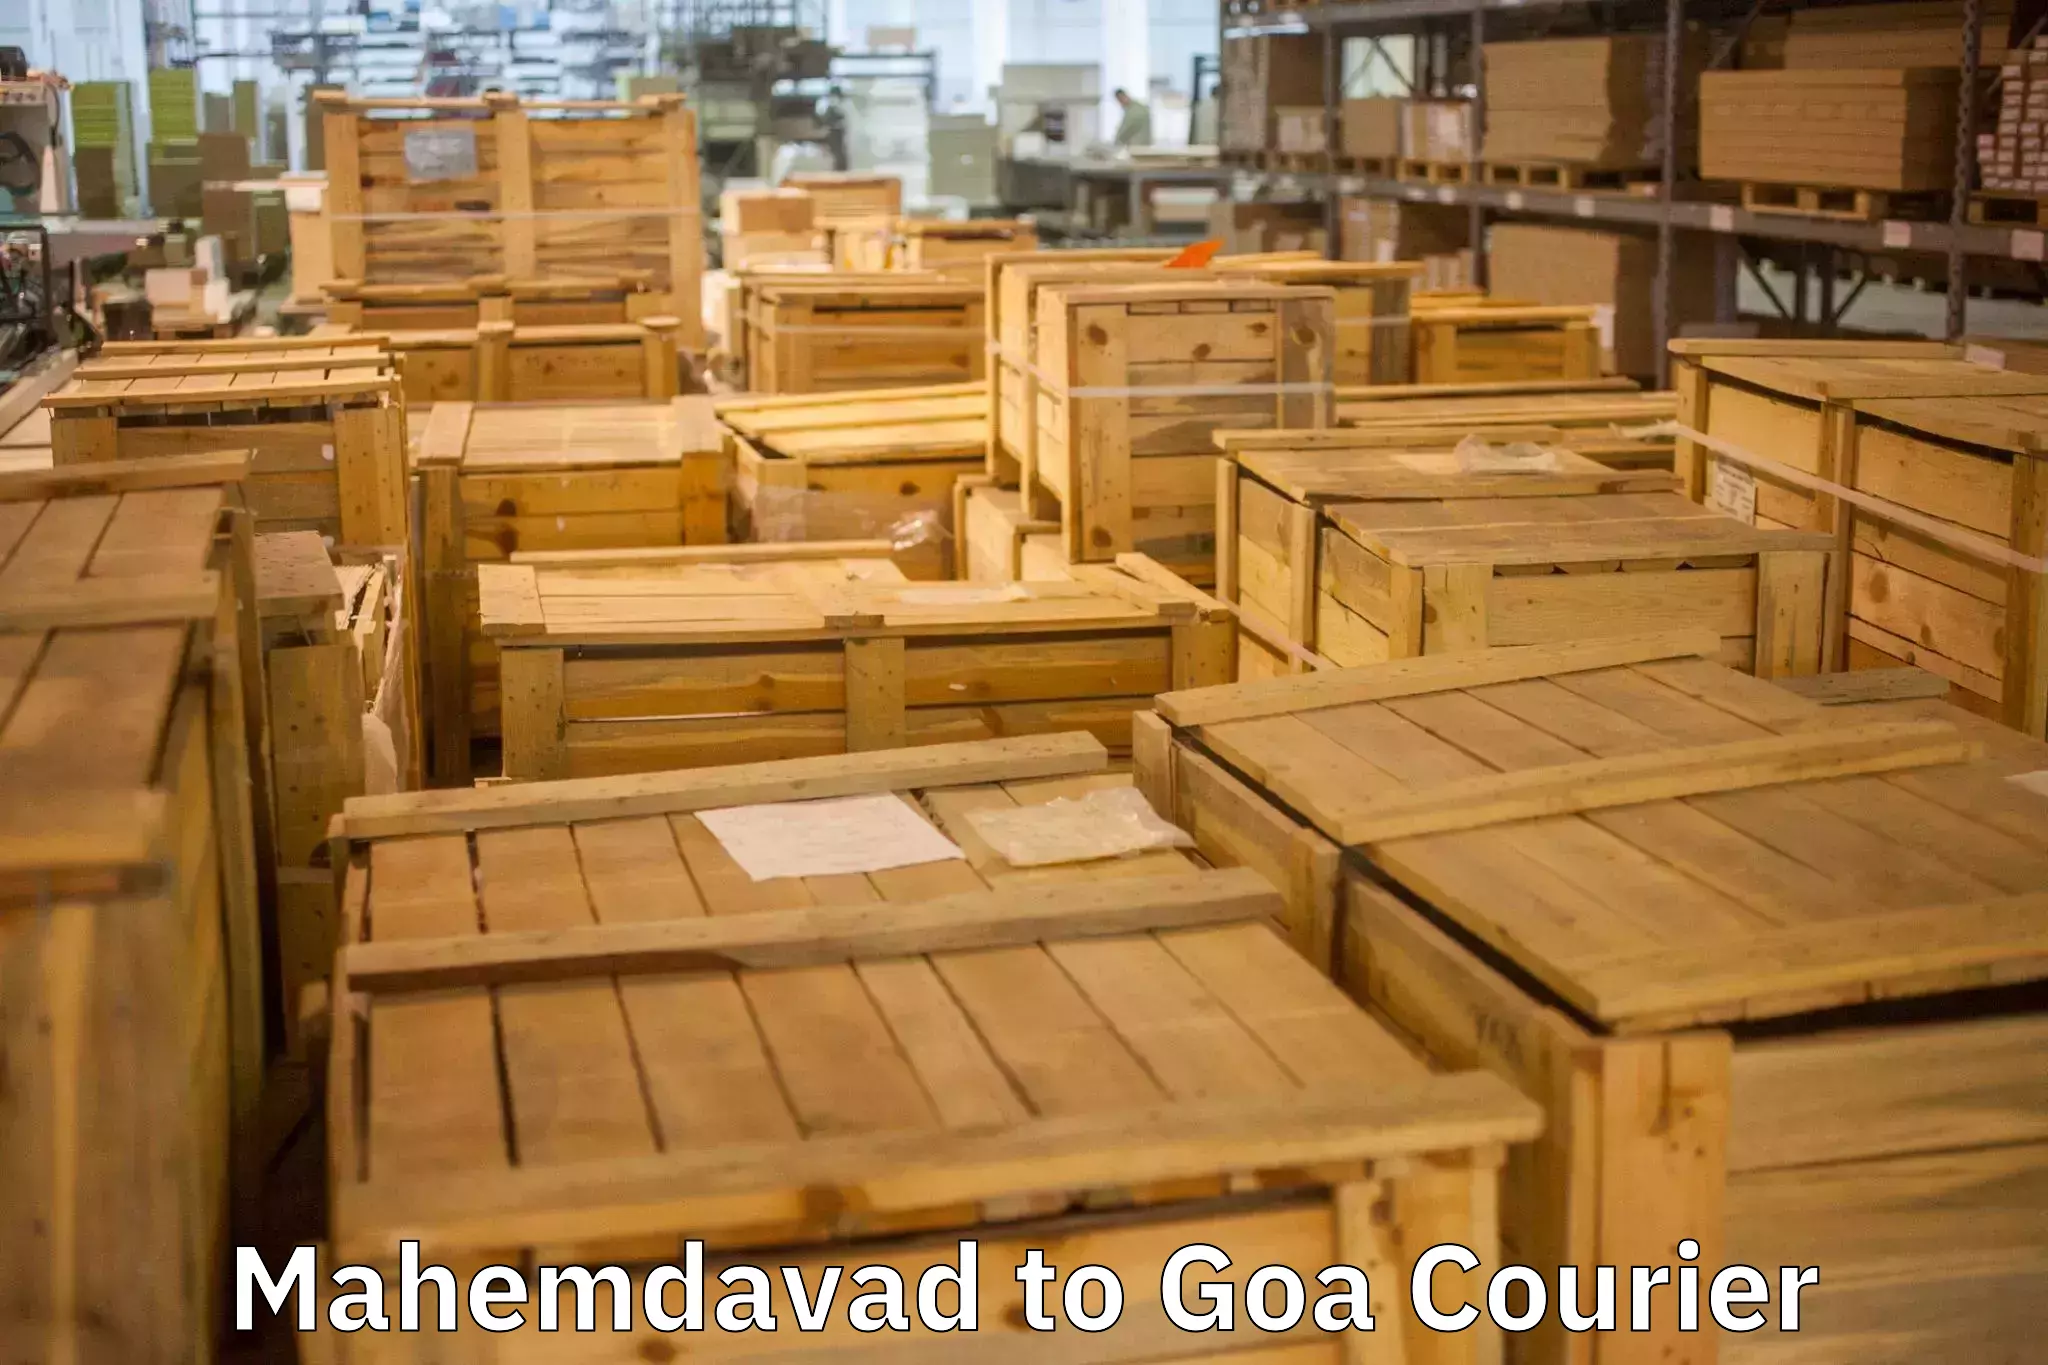 Trusted moving company Mahemdavad to South Goa